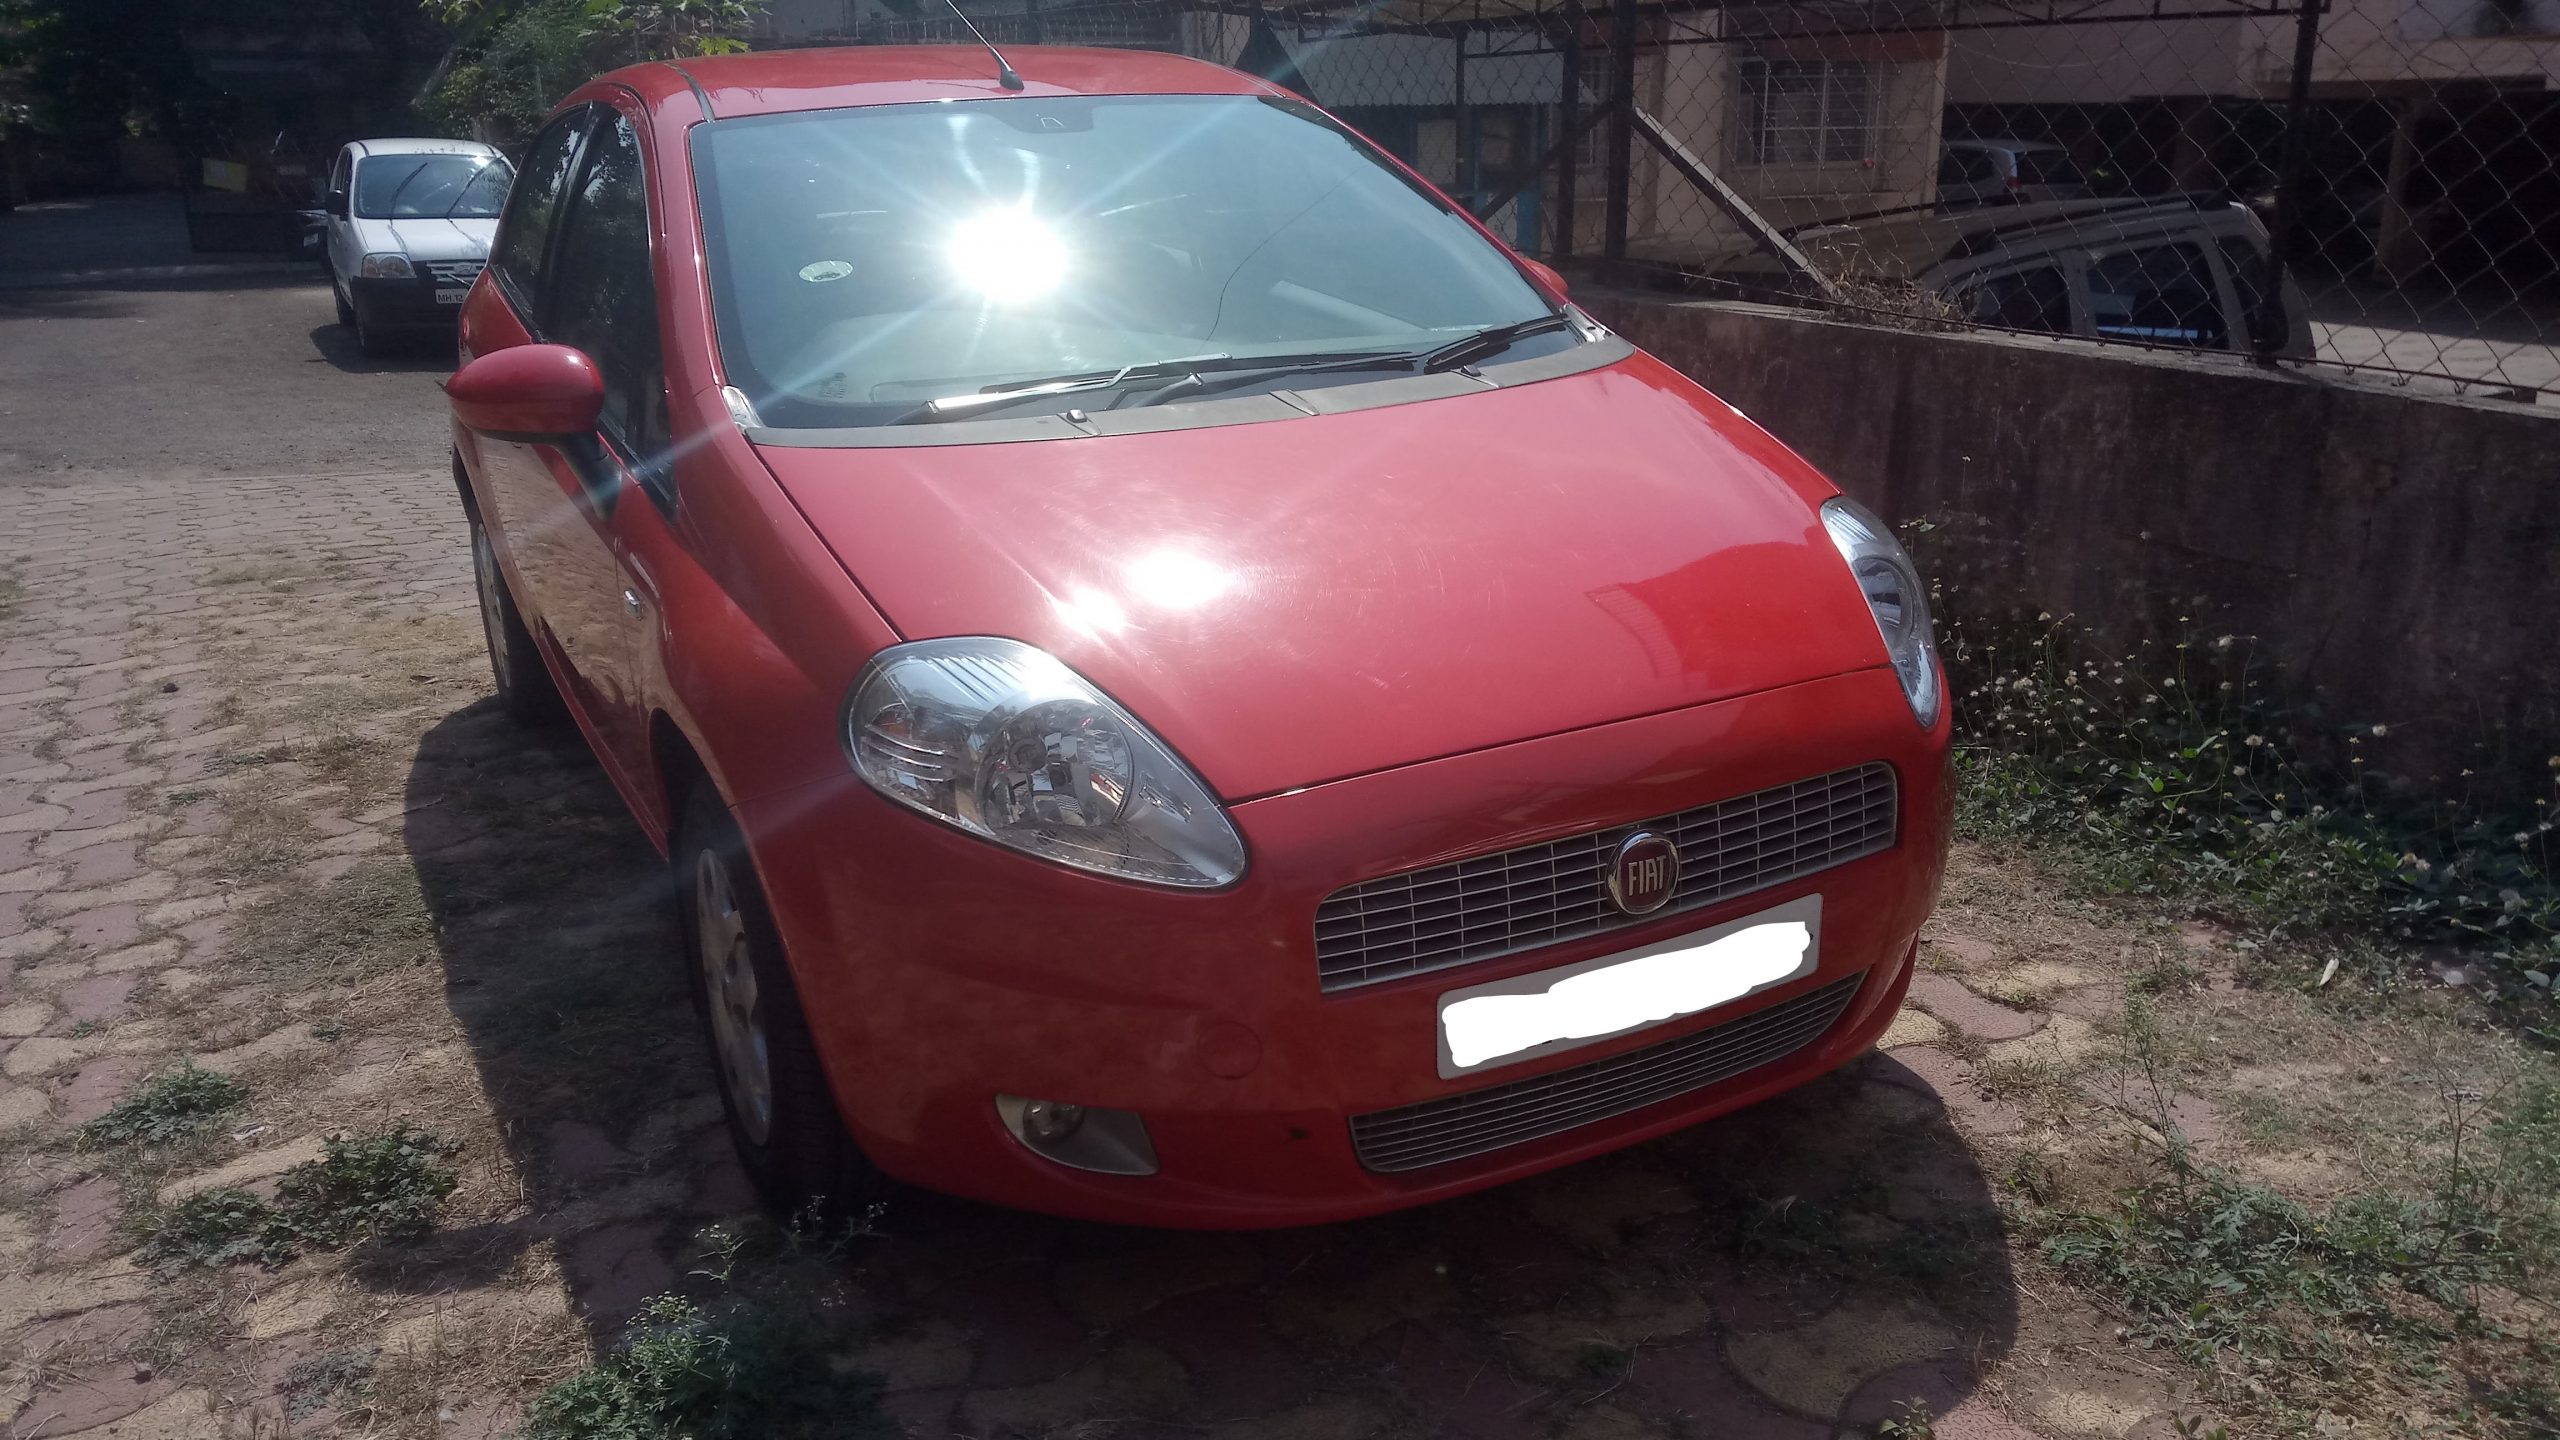 Living with the Fiat Punto